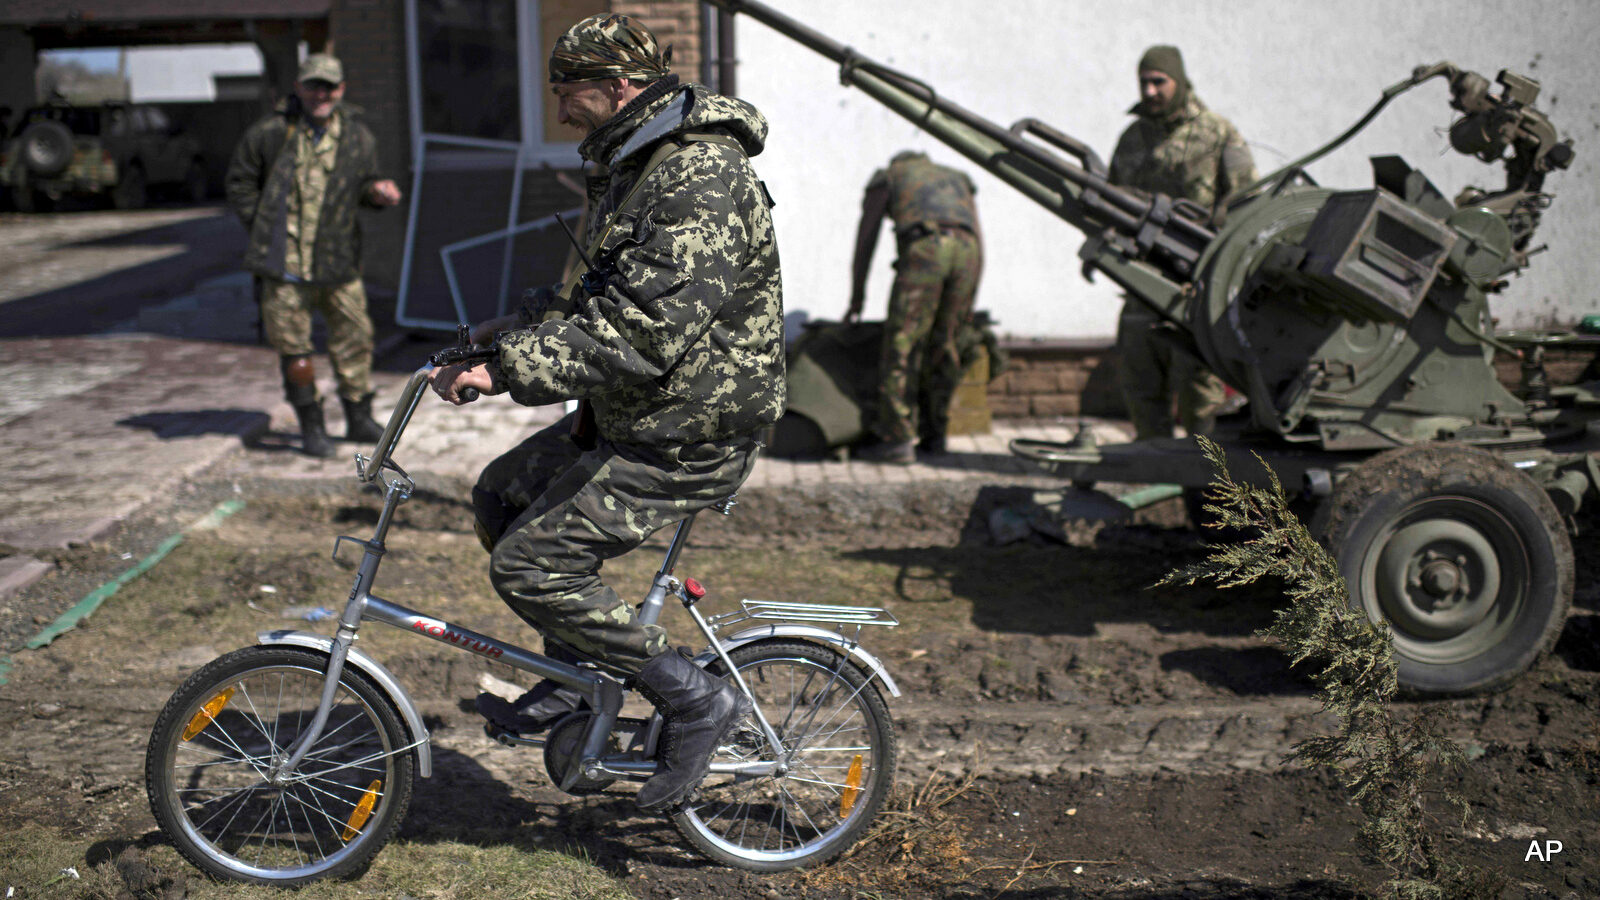 A Ukrainian serviceman rides a bicycle in Shyrokyne, eastern Ukraine, Wednesday, April 15, 2015. Russia and Ukraine agreed in Berlin on Monday to call for the pullback of smaller-caliber weapons from the front lines of the conflict that has claimed more than 6,000 lives.